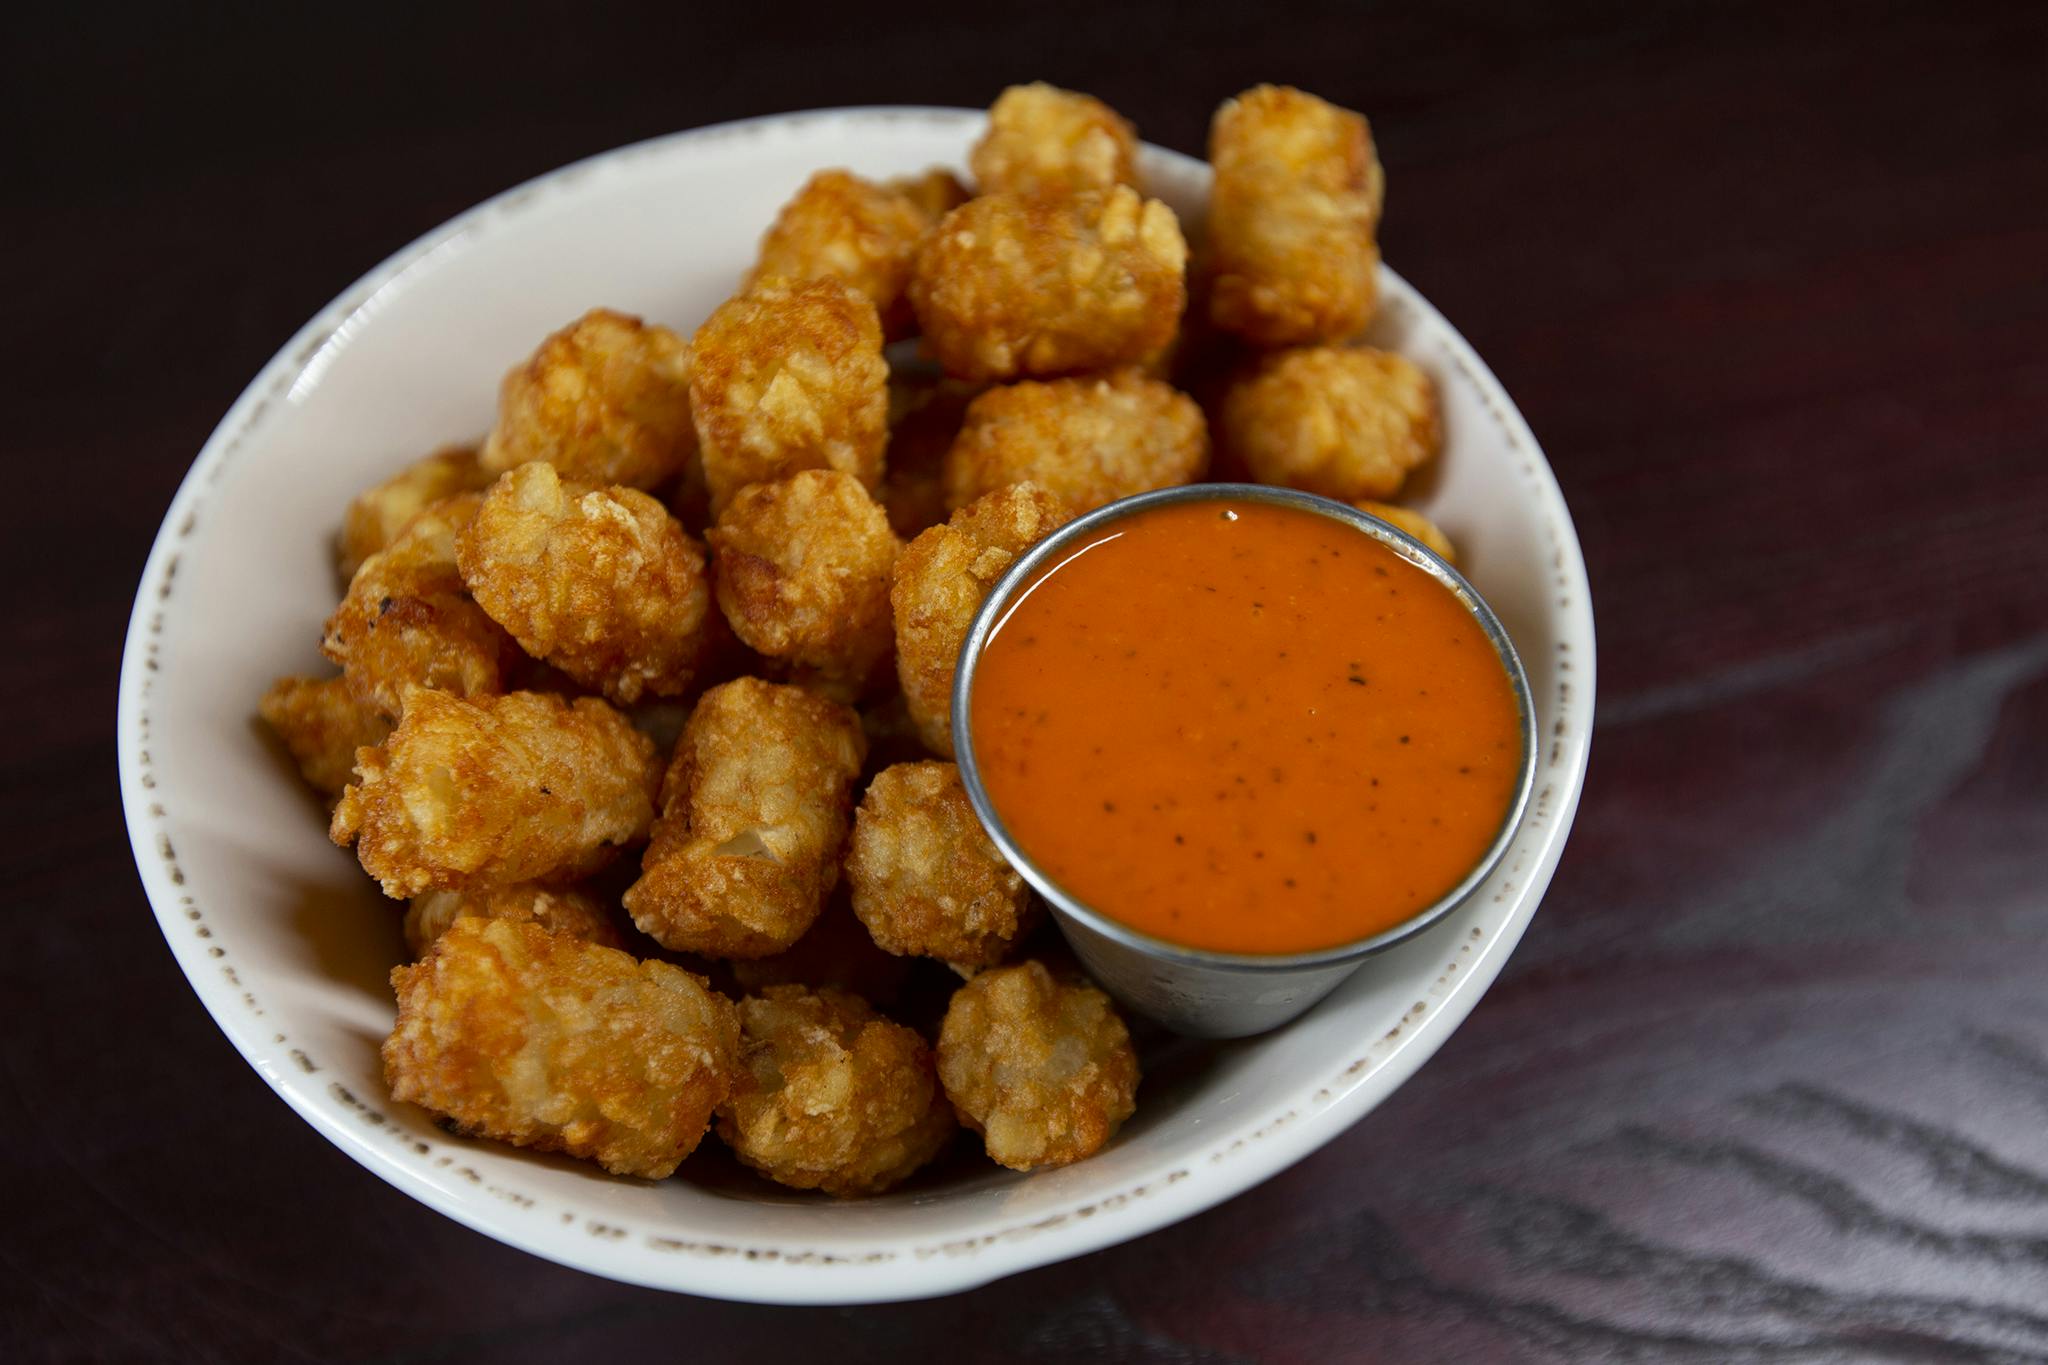 Buffalo Tots from Firehouse Grill - Chicago Ave in Evanston, IL